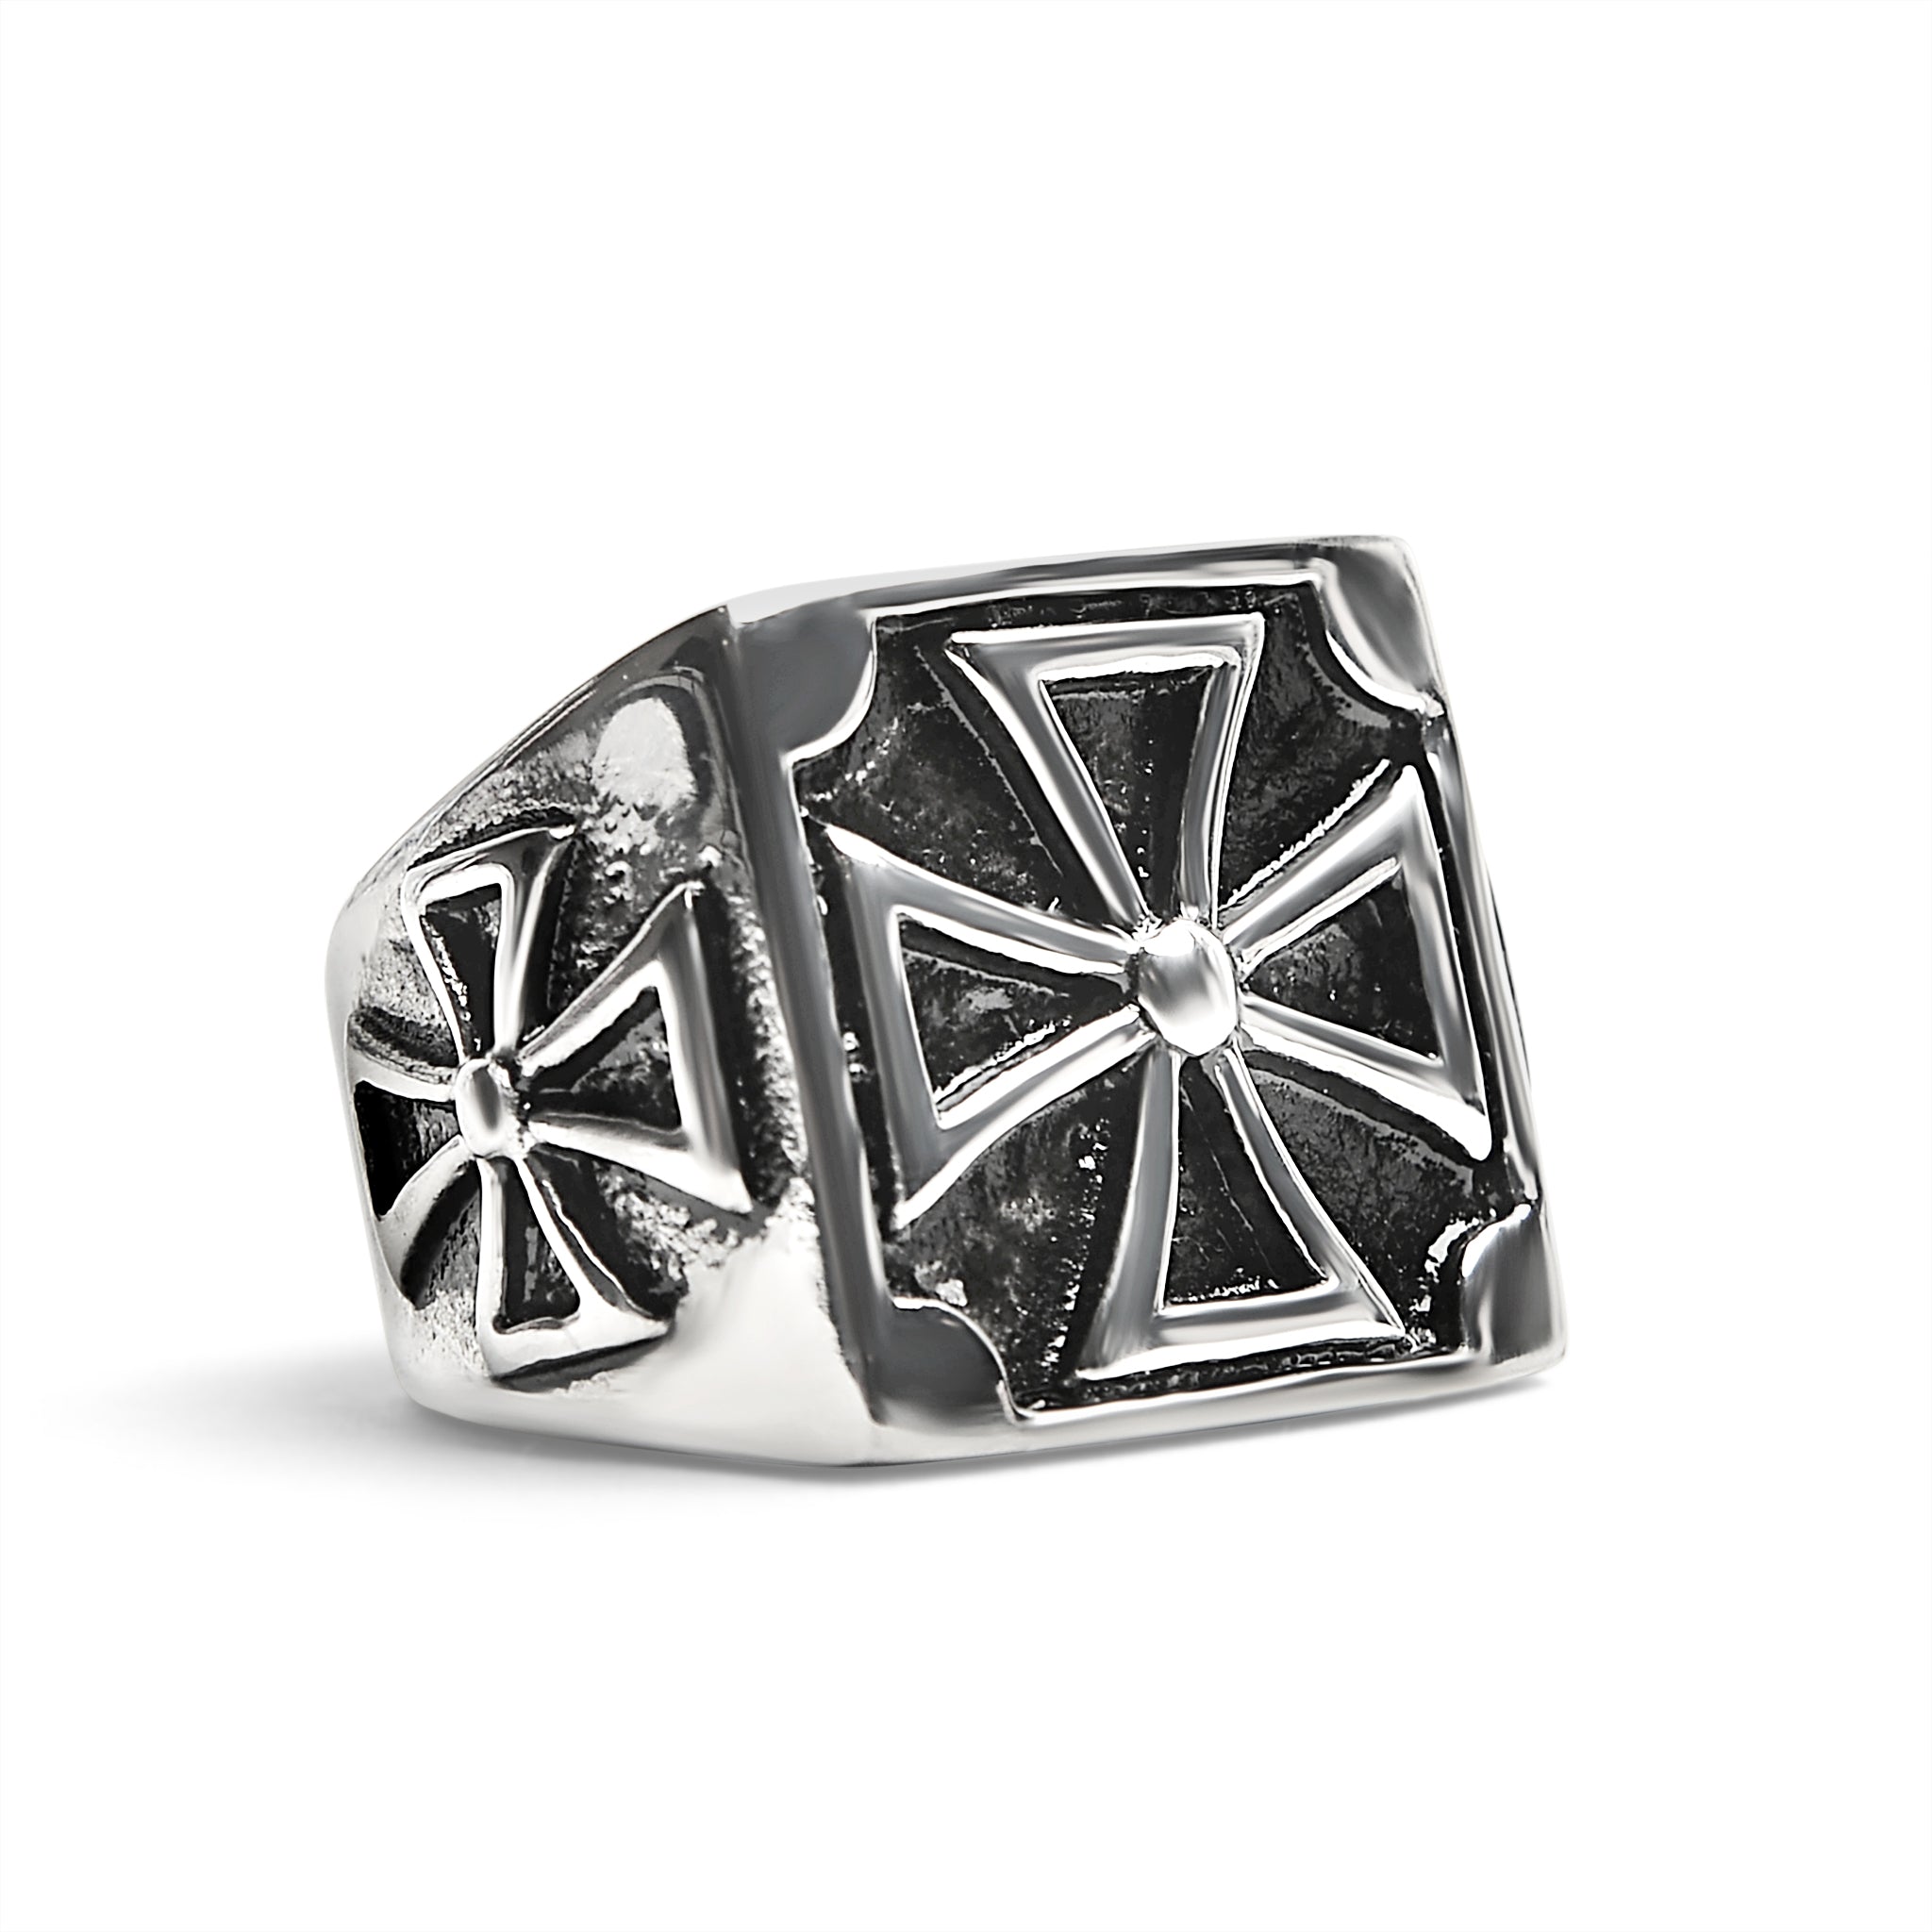 Stainless Steel Maltese Cross Signet Ring - Durable and Stylish - Jewelry & Watches - Bijou Her -  -  - 